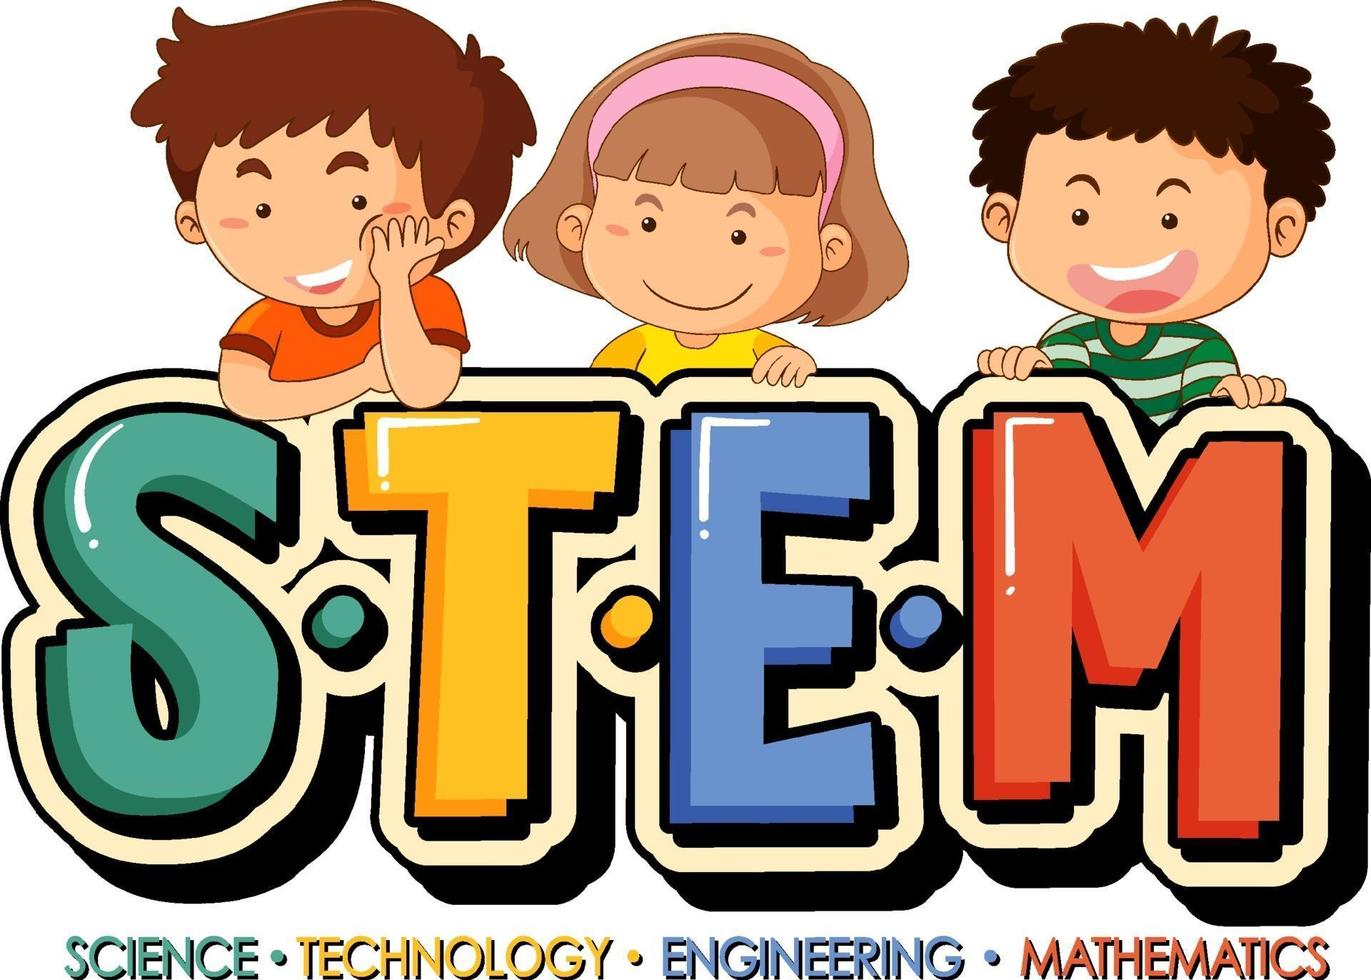 STEM education logo with little kids cartoon character vector